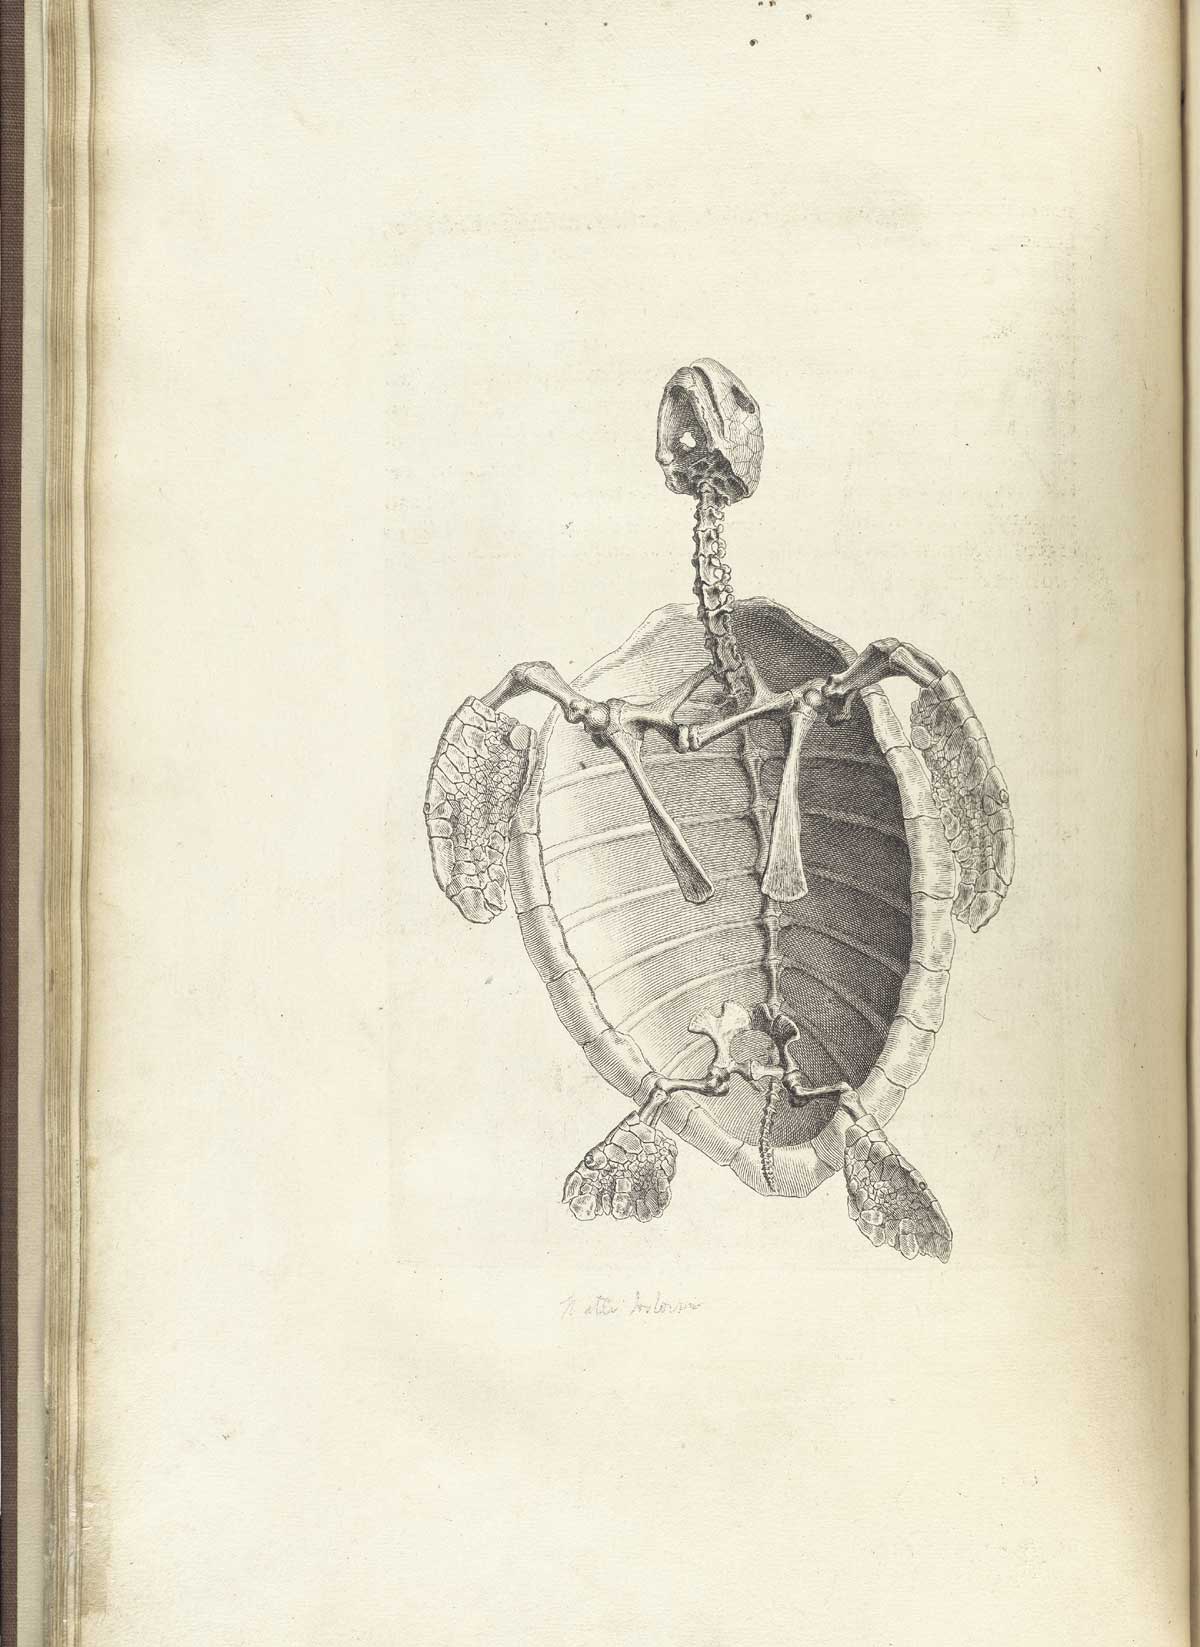 Engraving of the skeleton of a 'water tortoise' appearing to swim upward to the top of the page, with front and back flippers and shell, from William Cheselden’s Osteographia, NLM Call no.: WZ 260 C499o 1733.